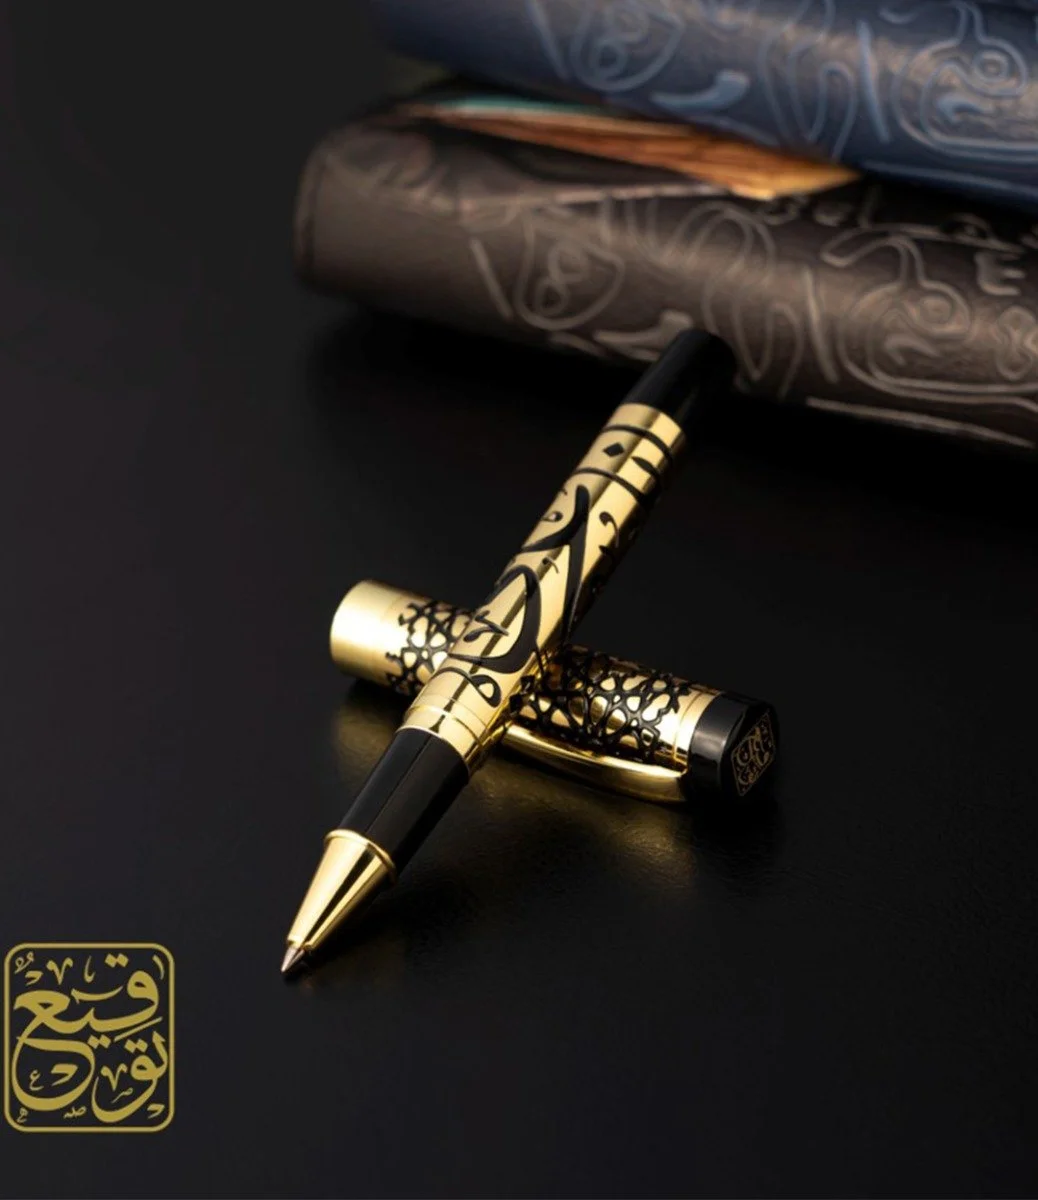 Ana Arabi "I am Arab" pen engraved with Thuluth calligraphy on the body of the pen and the Islamic geometric decoration on the cap of the pen